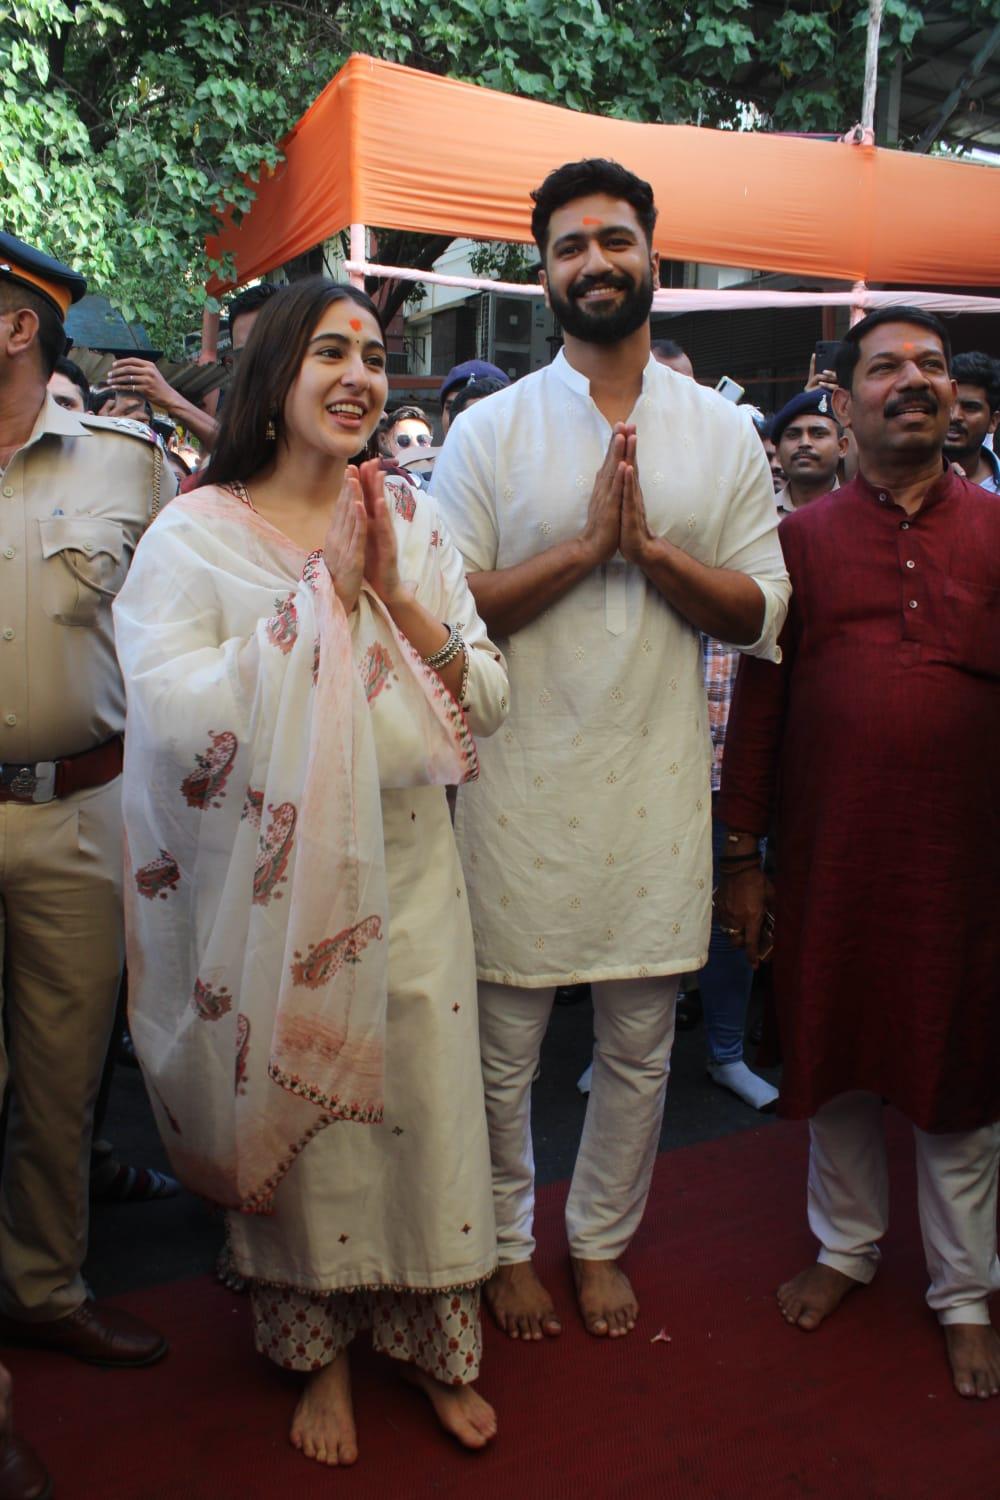 Sara Ali Khan and Vicky Kaushal also greeted their fans and the media outside the temple after their darshan. (Photo: Yogen Shah)